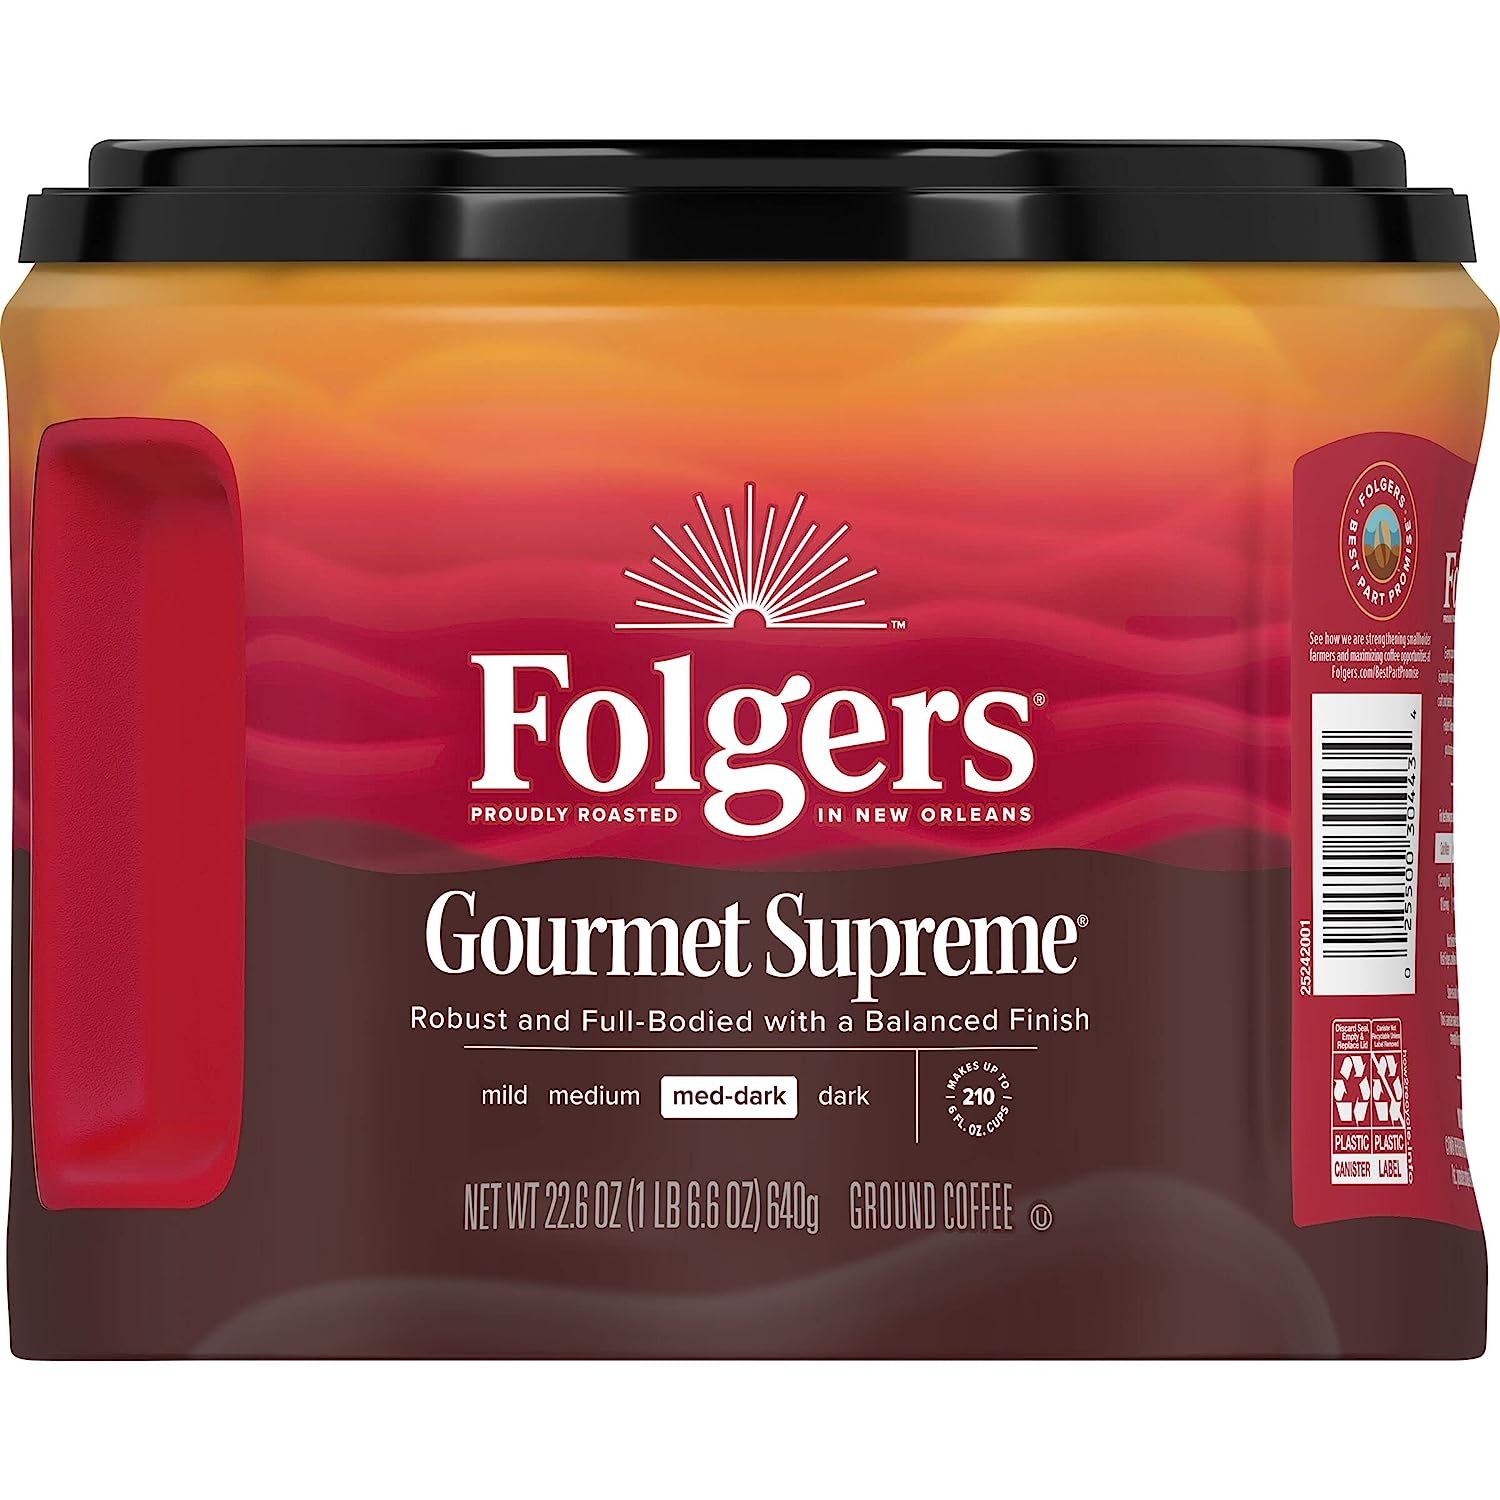 Folgers Gourmet Supreme Ground Coffee Canisters